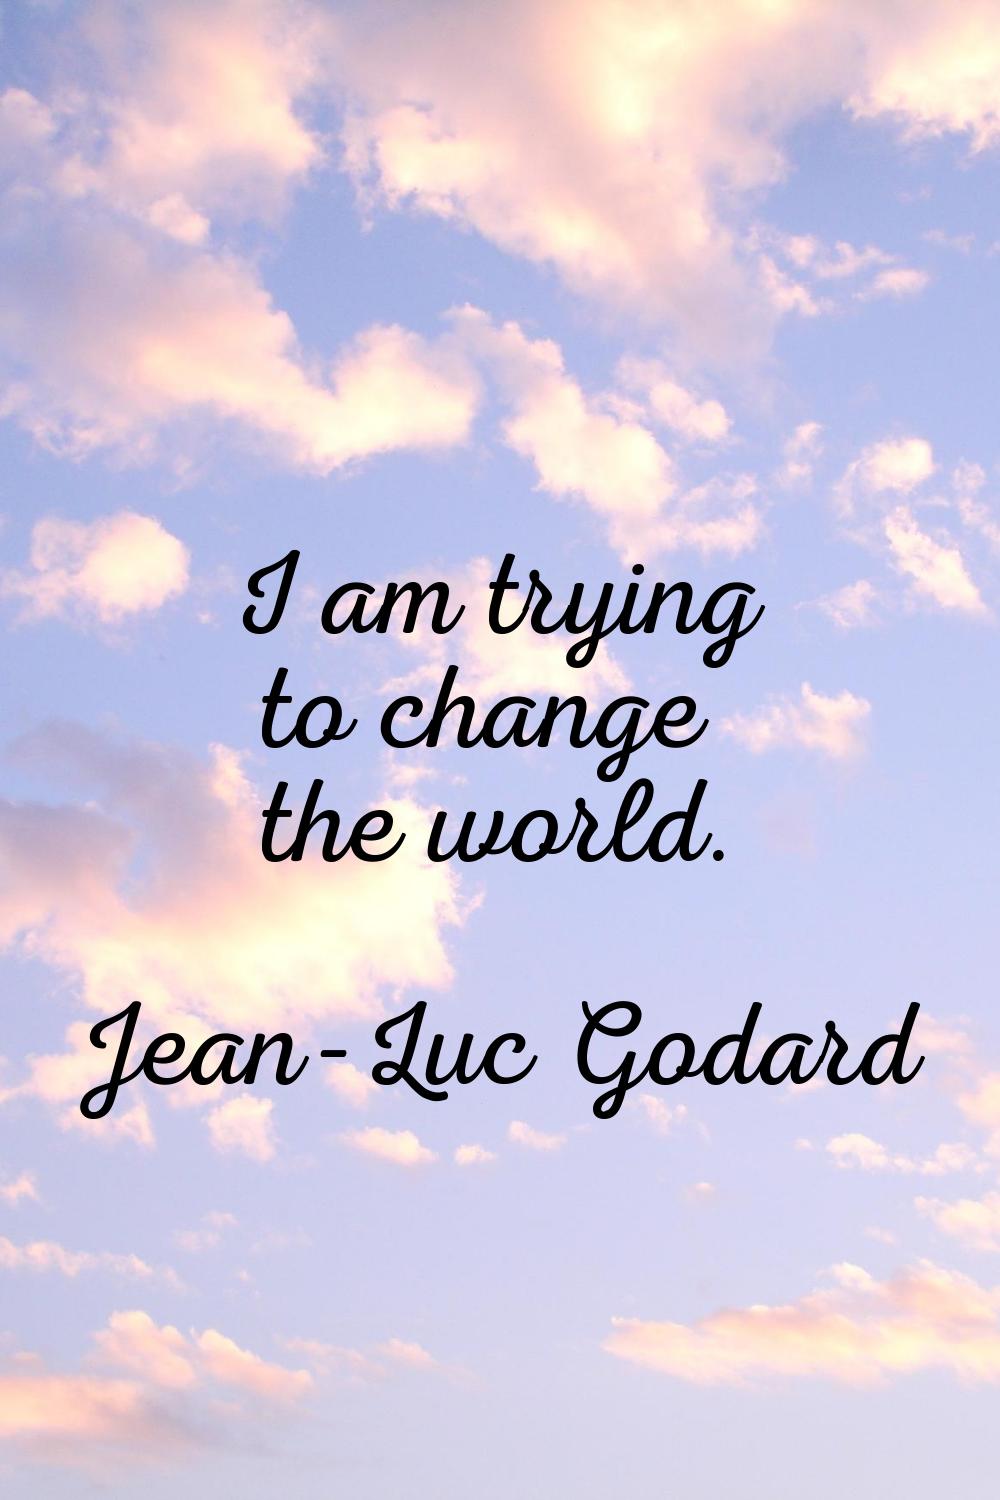 I am trying to change the world.